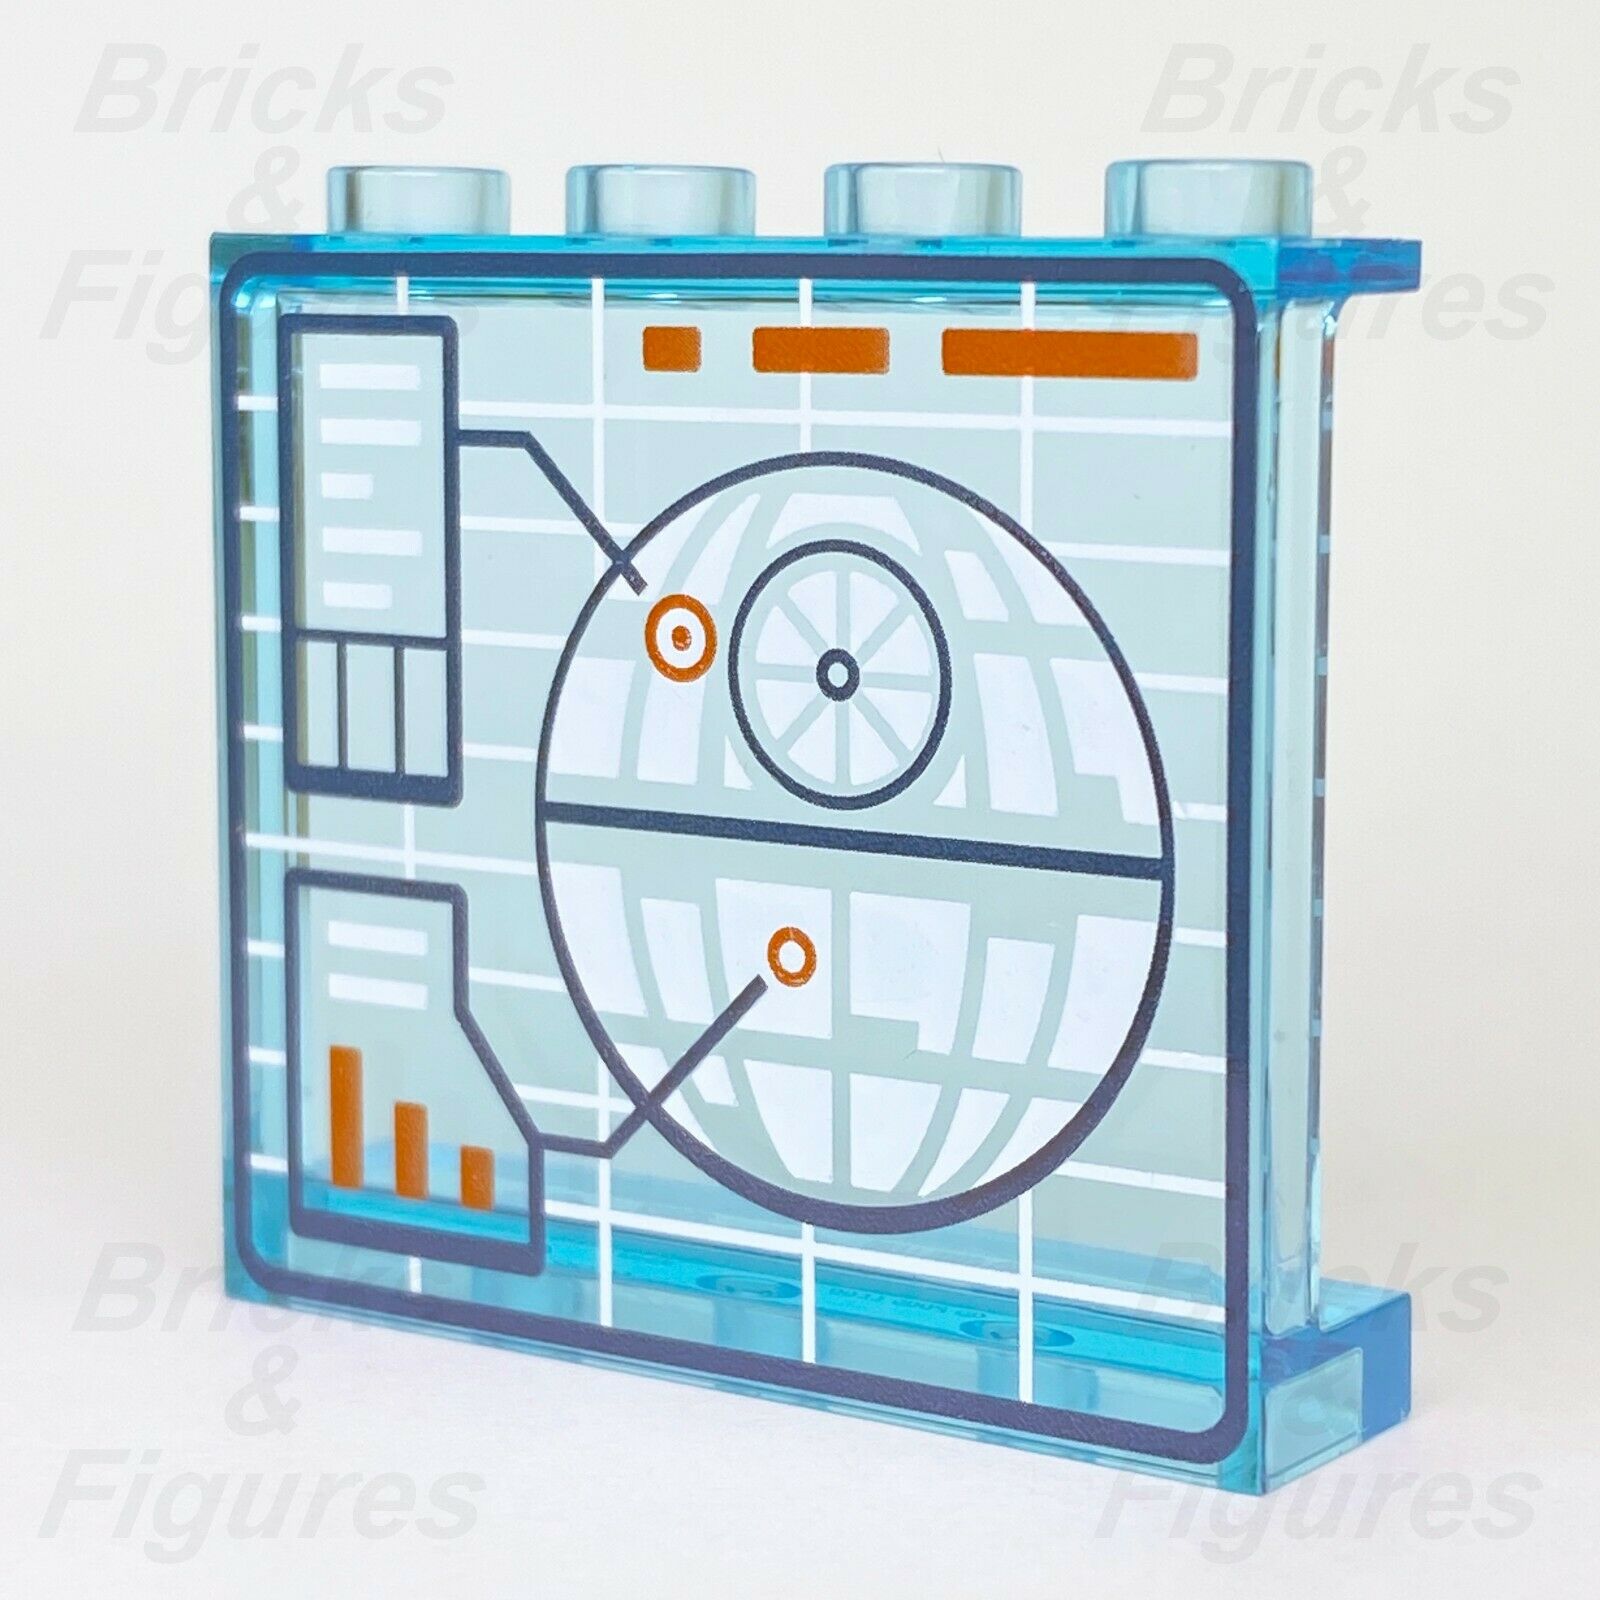 New Star Wars LEGO Screen with Death Star Plans Genuine Part from set 75237 - Bricks & Figures